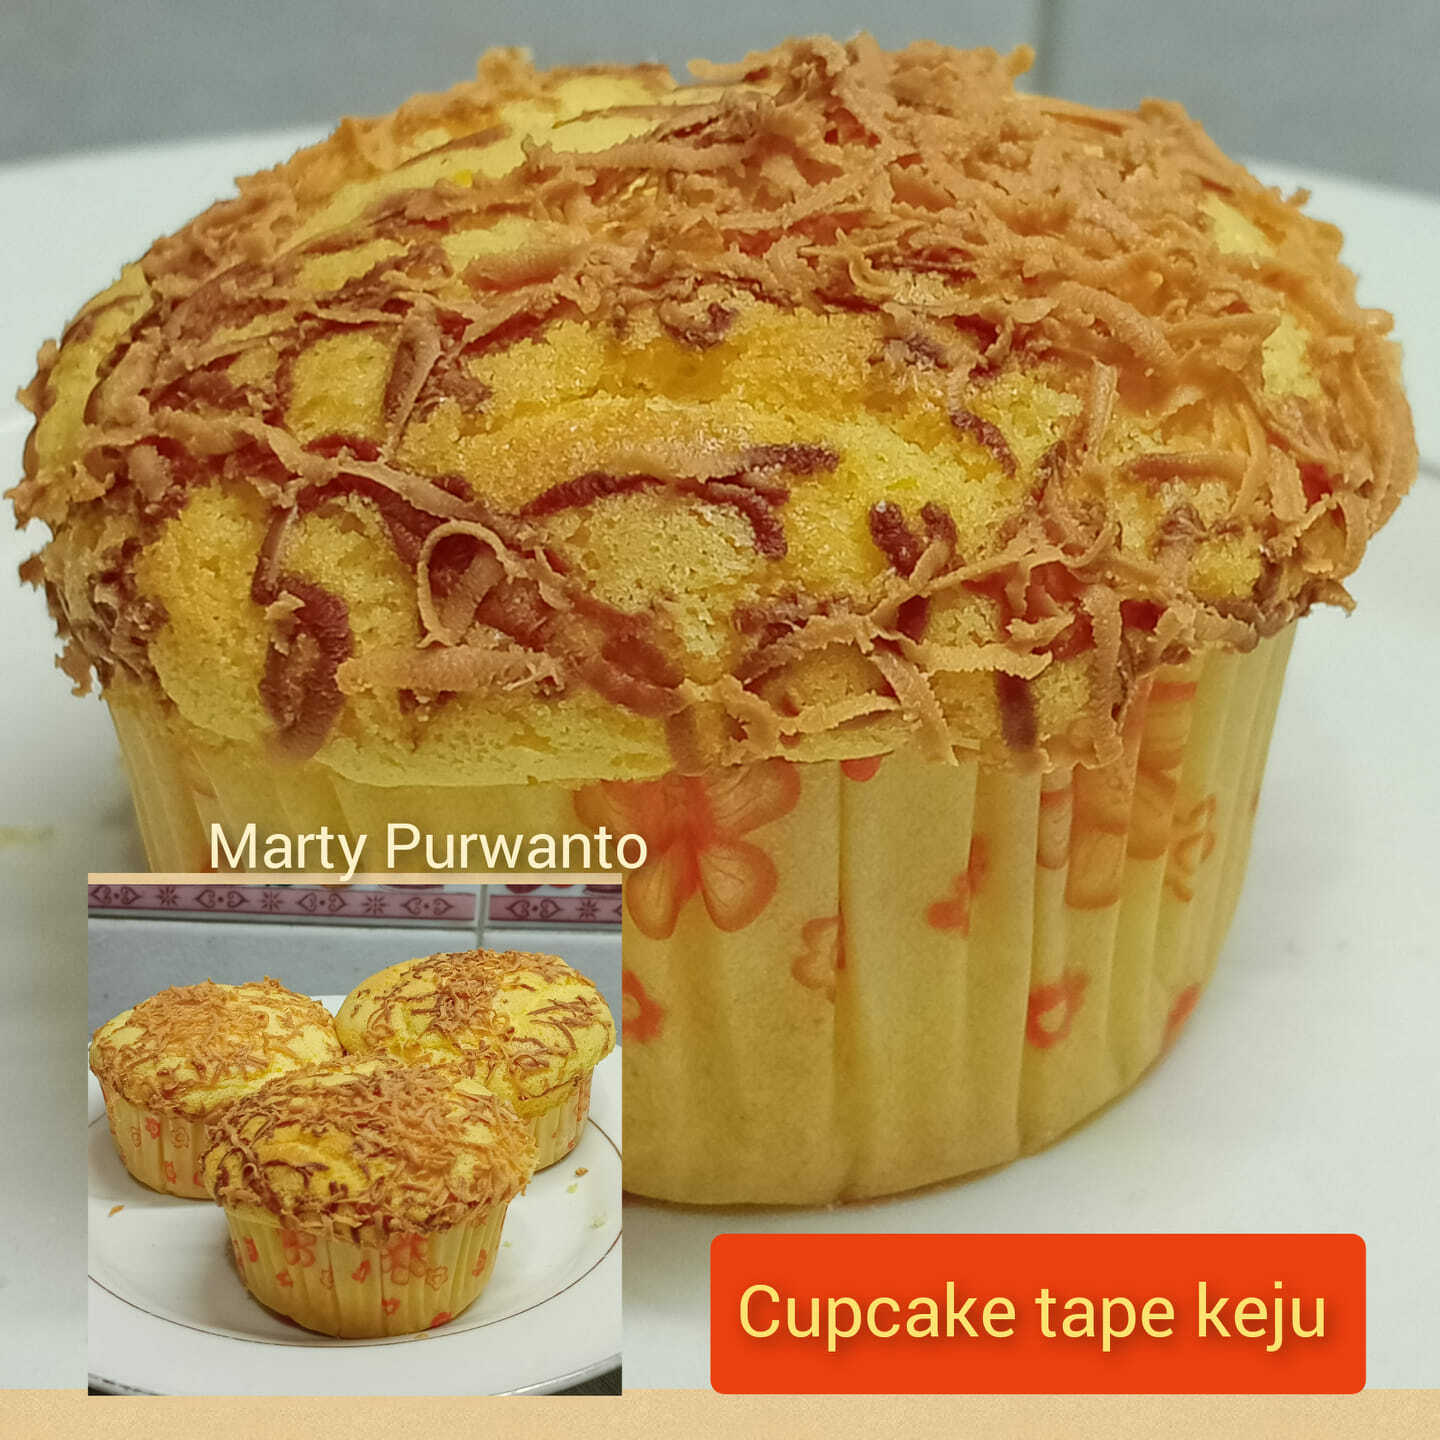 baking CUPCAKE TAPE KEJU by Marty Purwanto